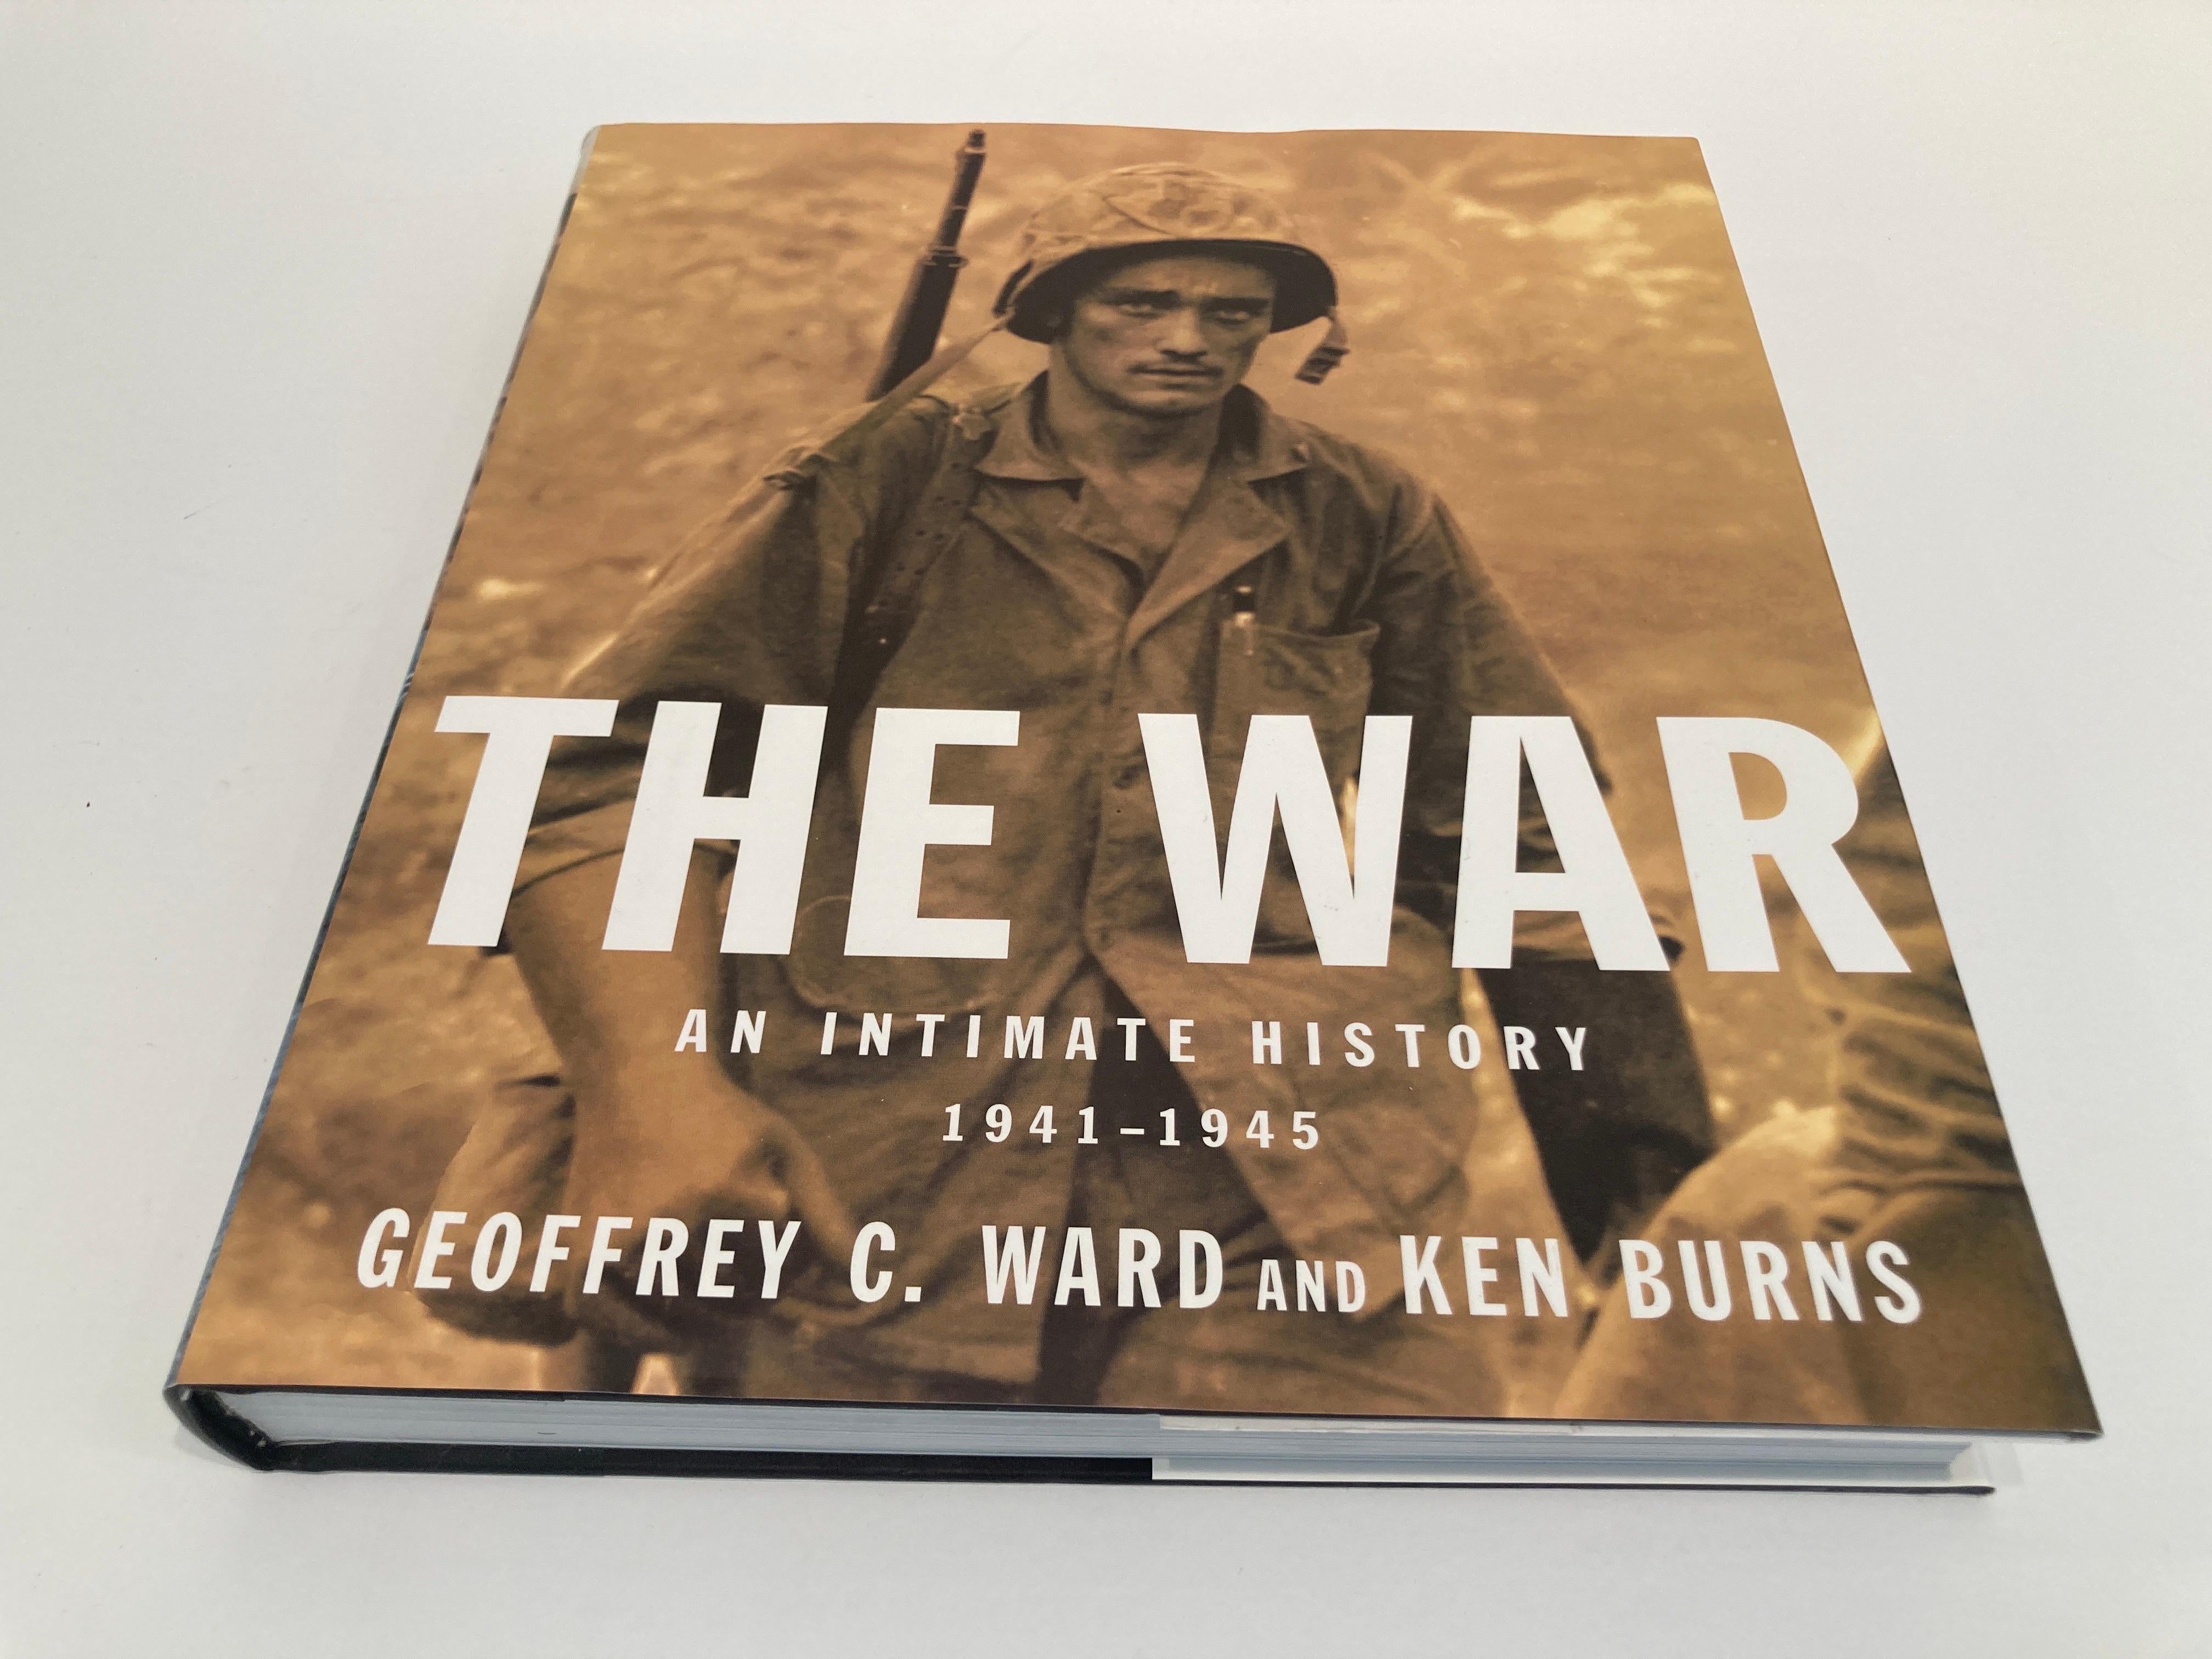 The War: An Intimate History, 1941-1945 Hardcover Book.
New York: Alfred A. Knopf, 2007. First Edition; First Printing. Hardcover.
First edition of this companion volume to the documentary by Ken Burns.
Based on a Ken Burns film, directed and